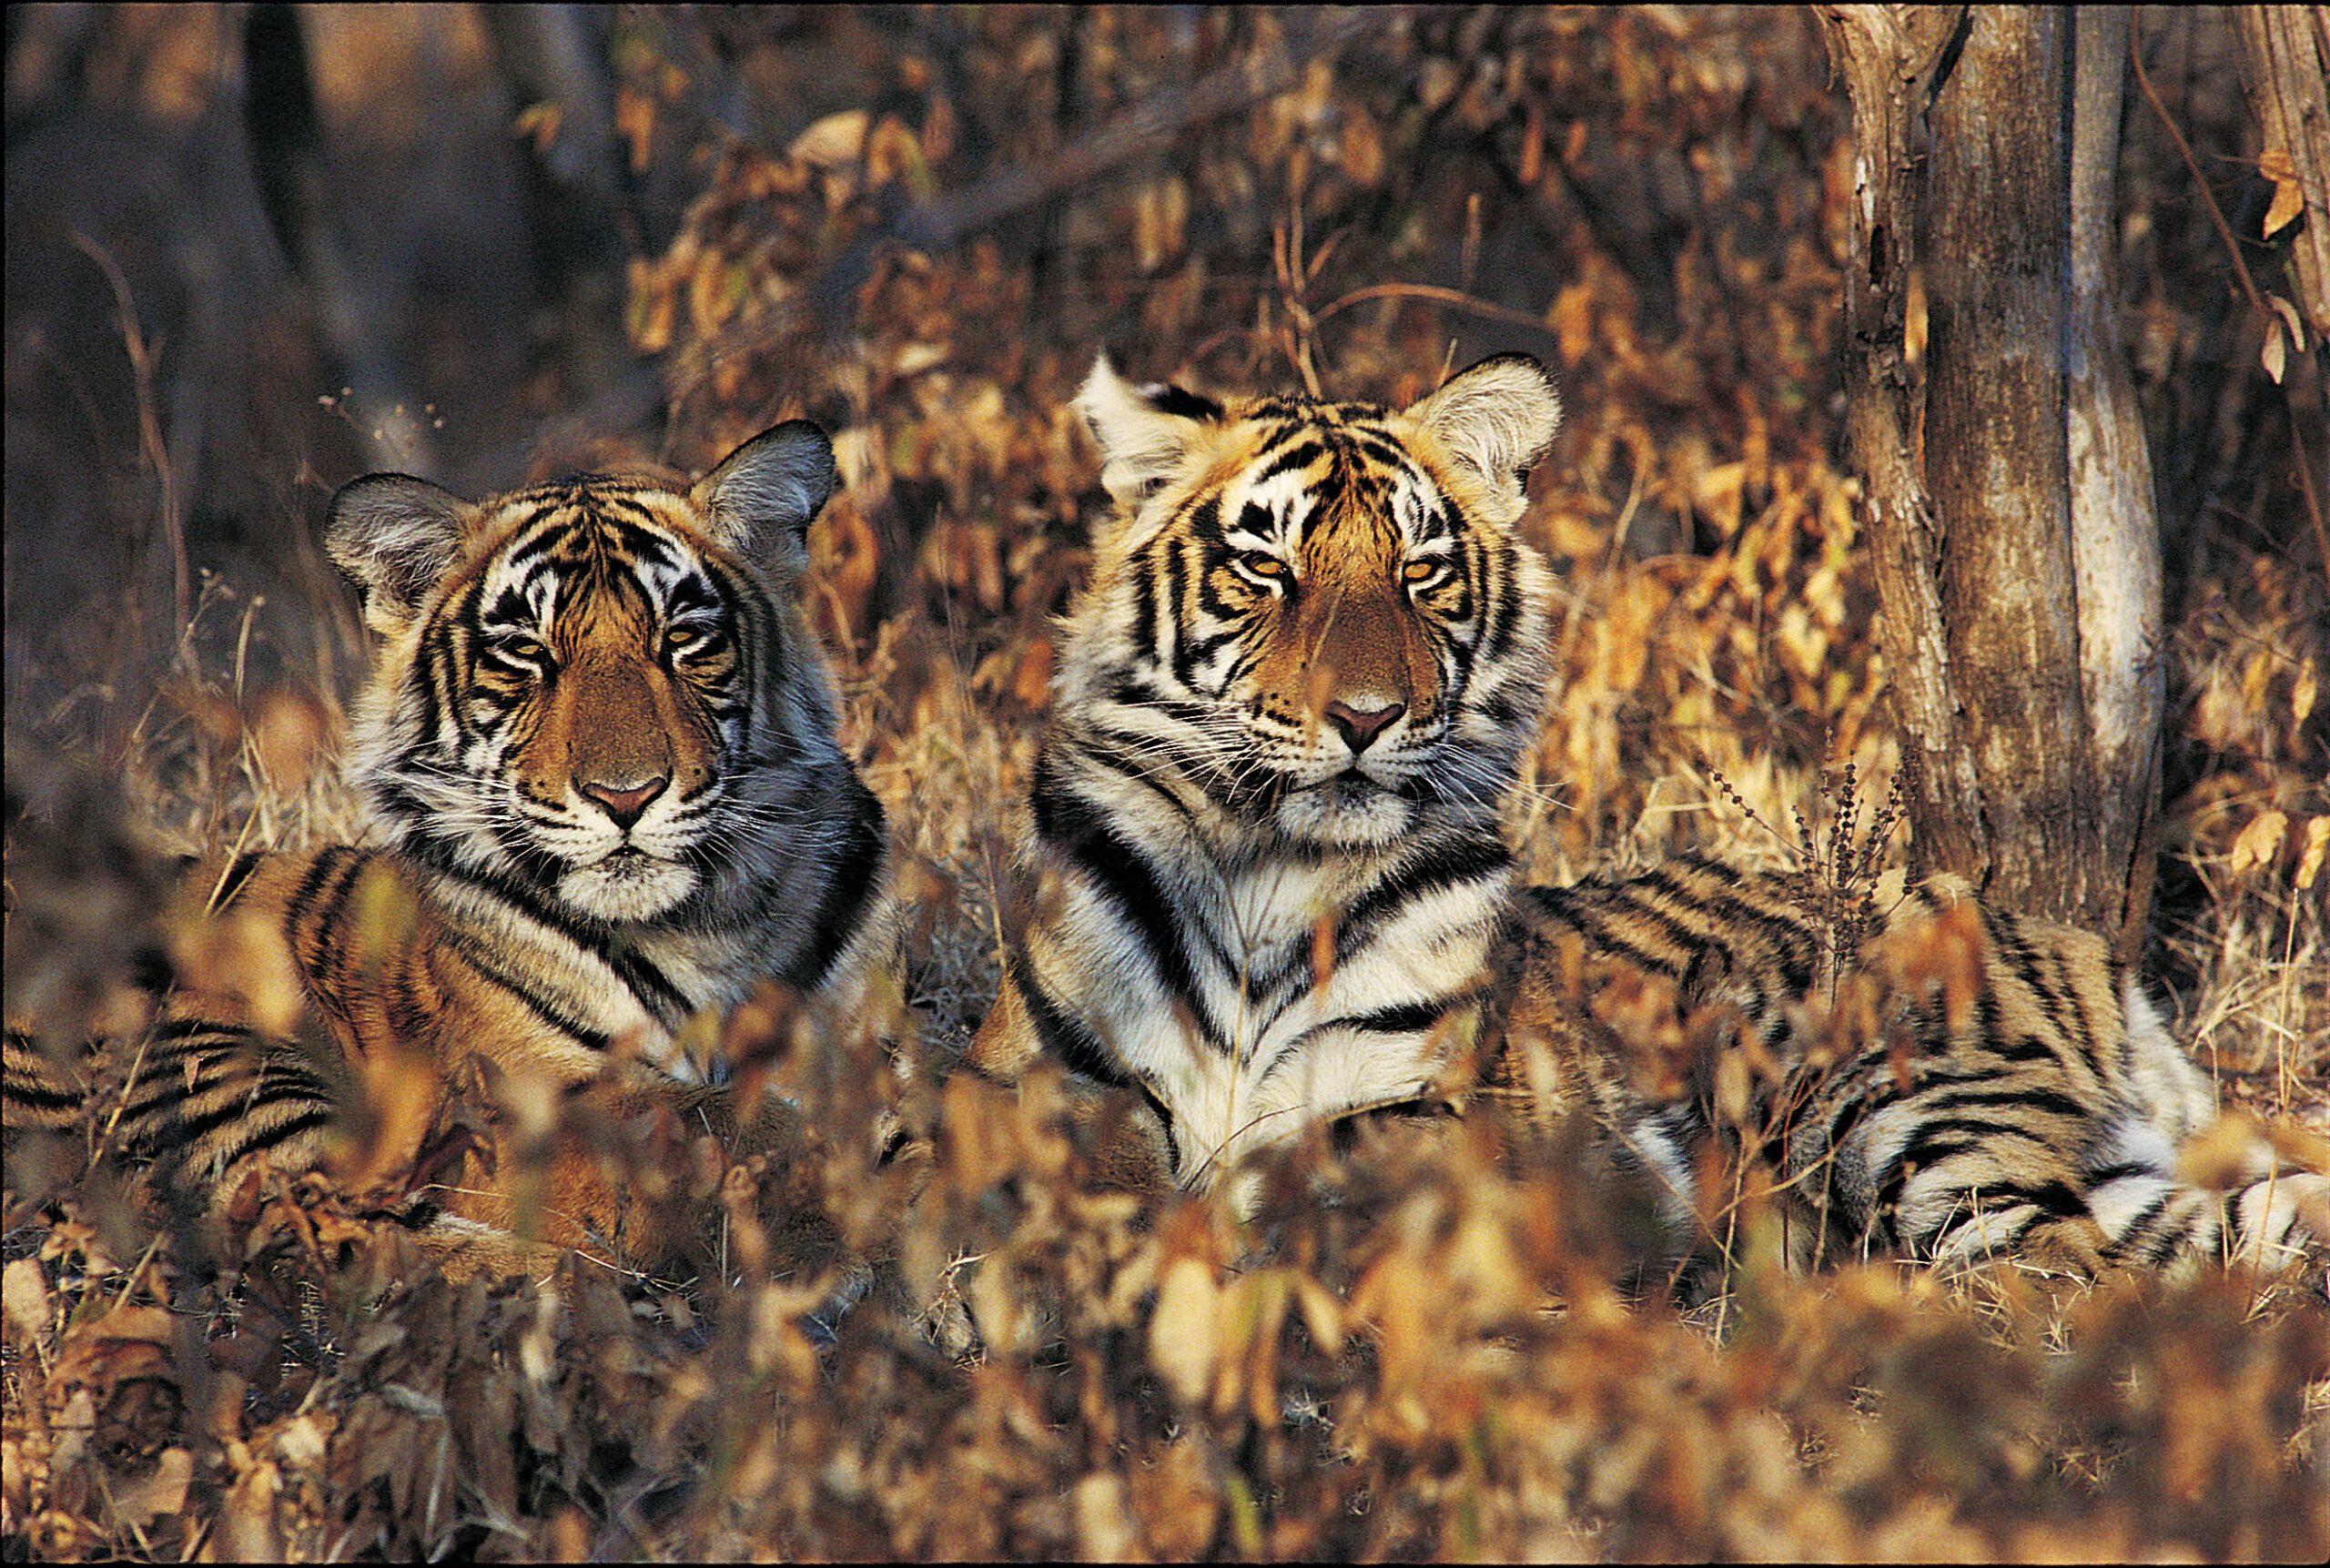 Tiger Brothers in Pench Nation Park